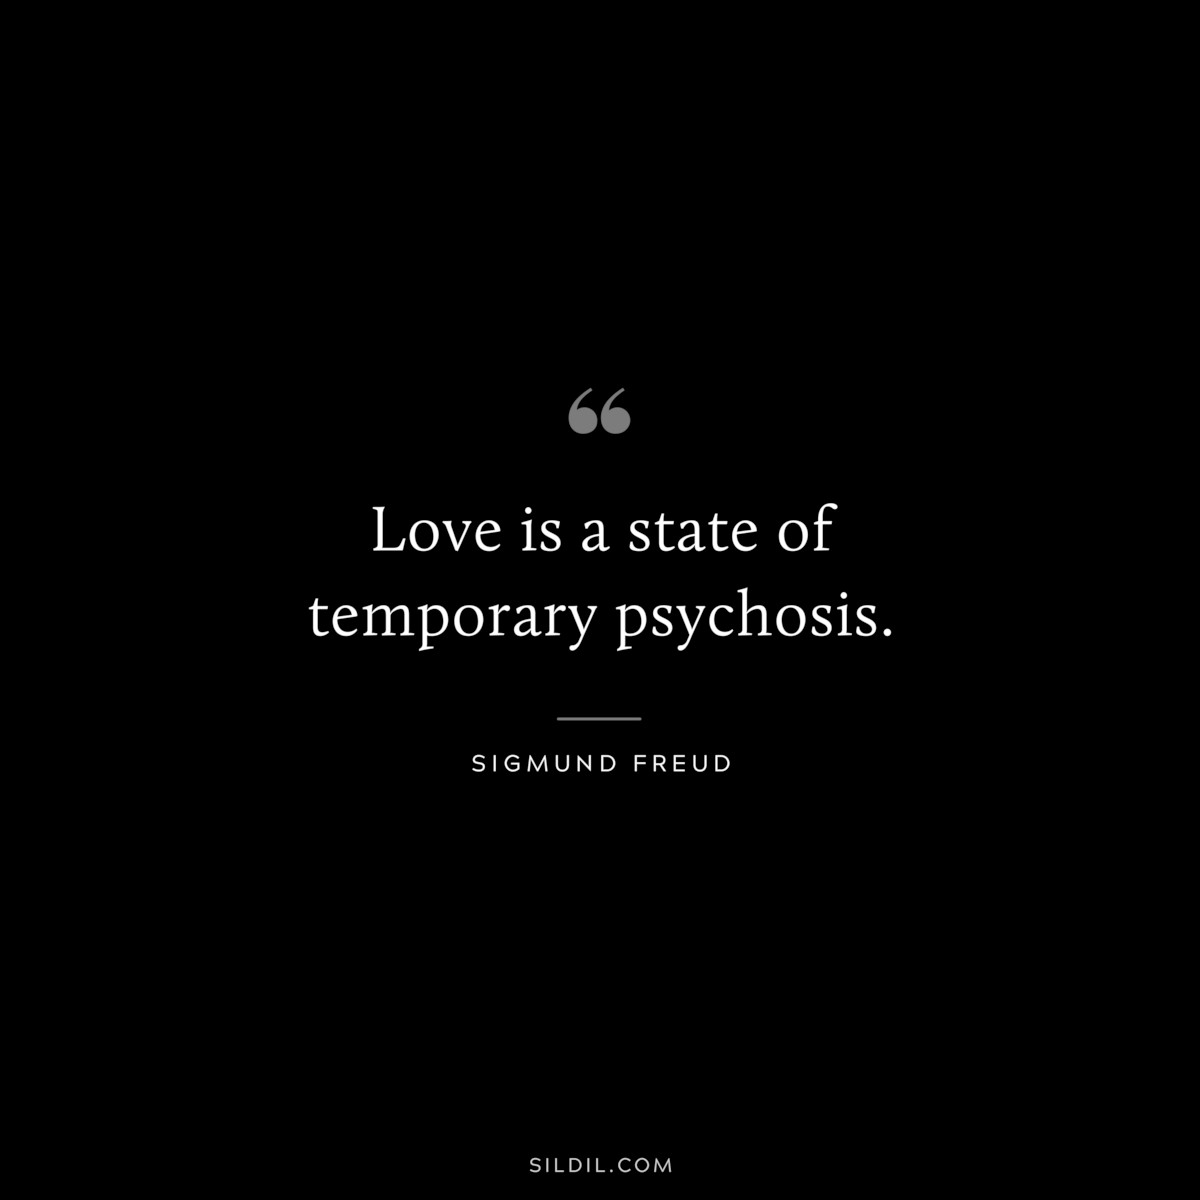 Love is a state of temporary psychosis. ― Sigmund Frued